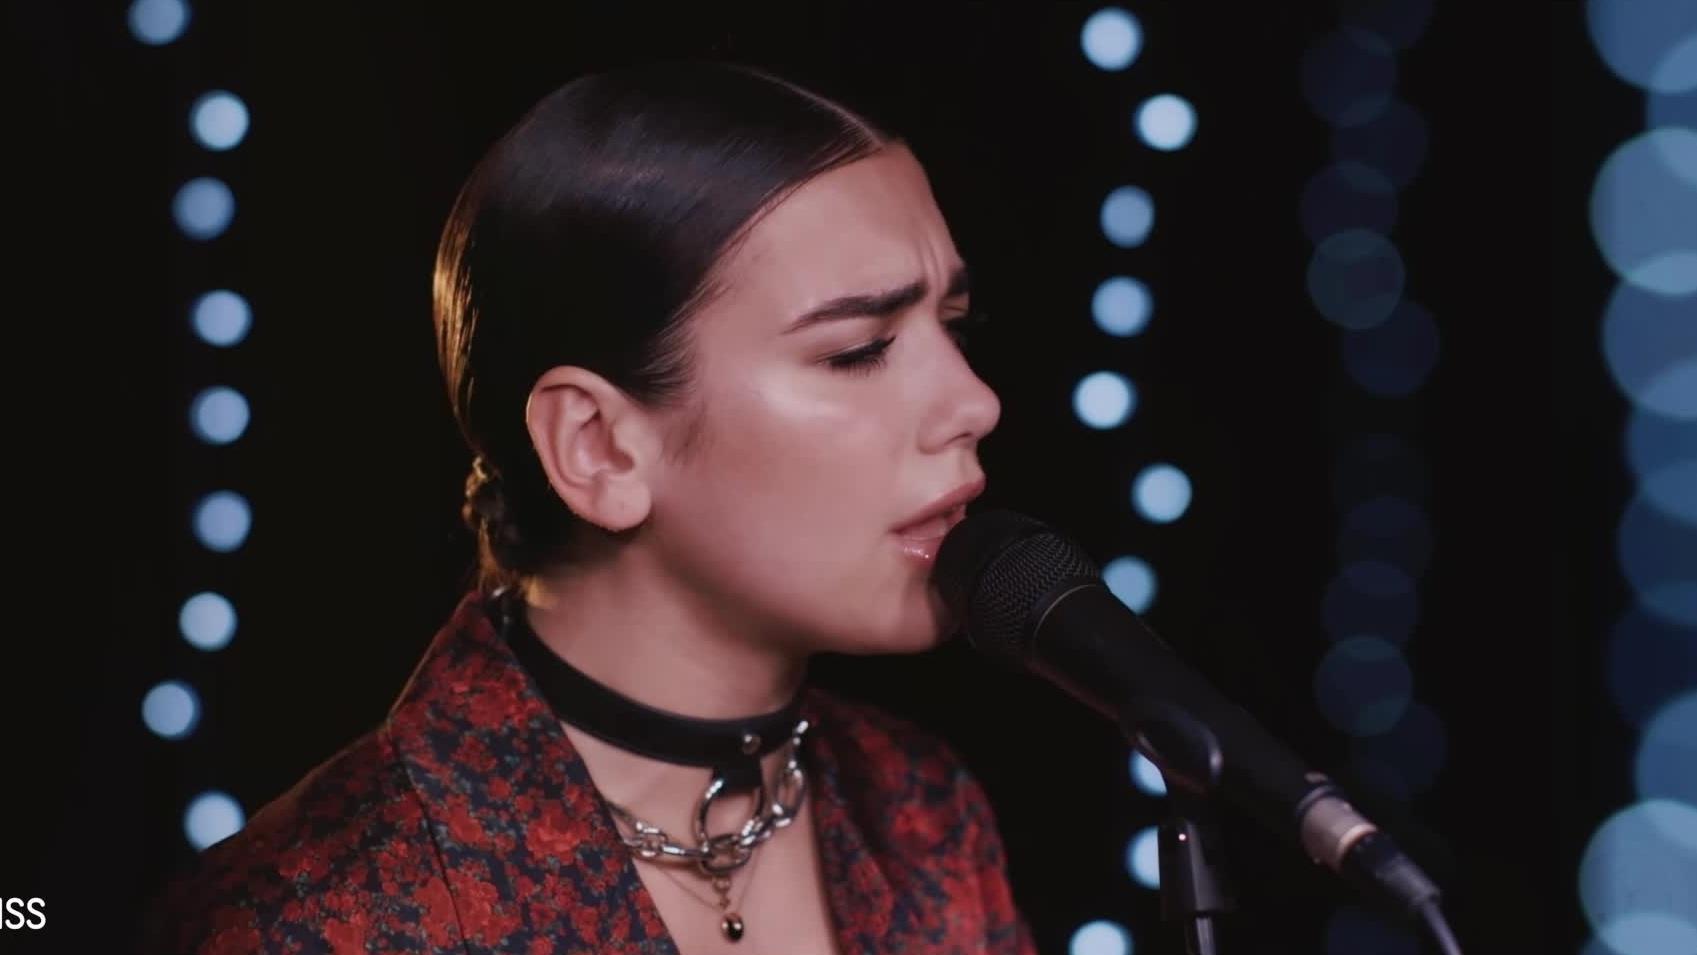 Dua Lipa - Lost In Your Light (Live at KISS Presents